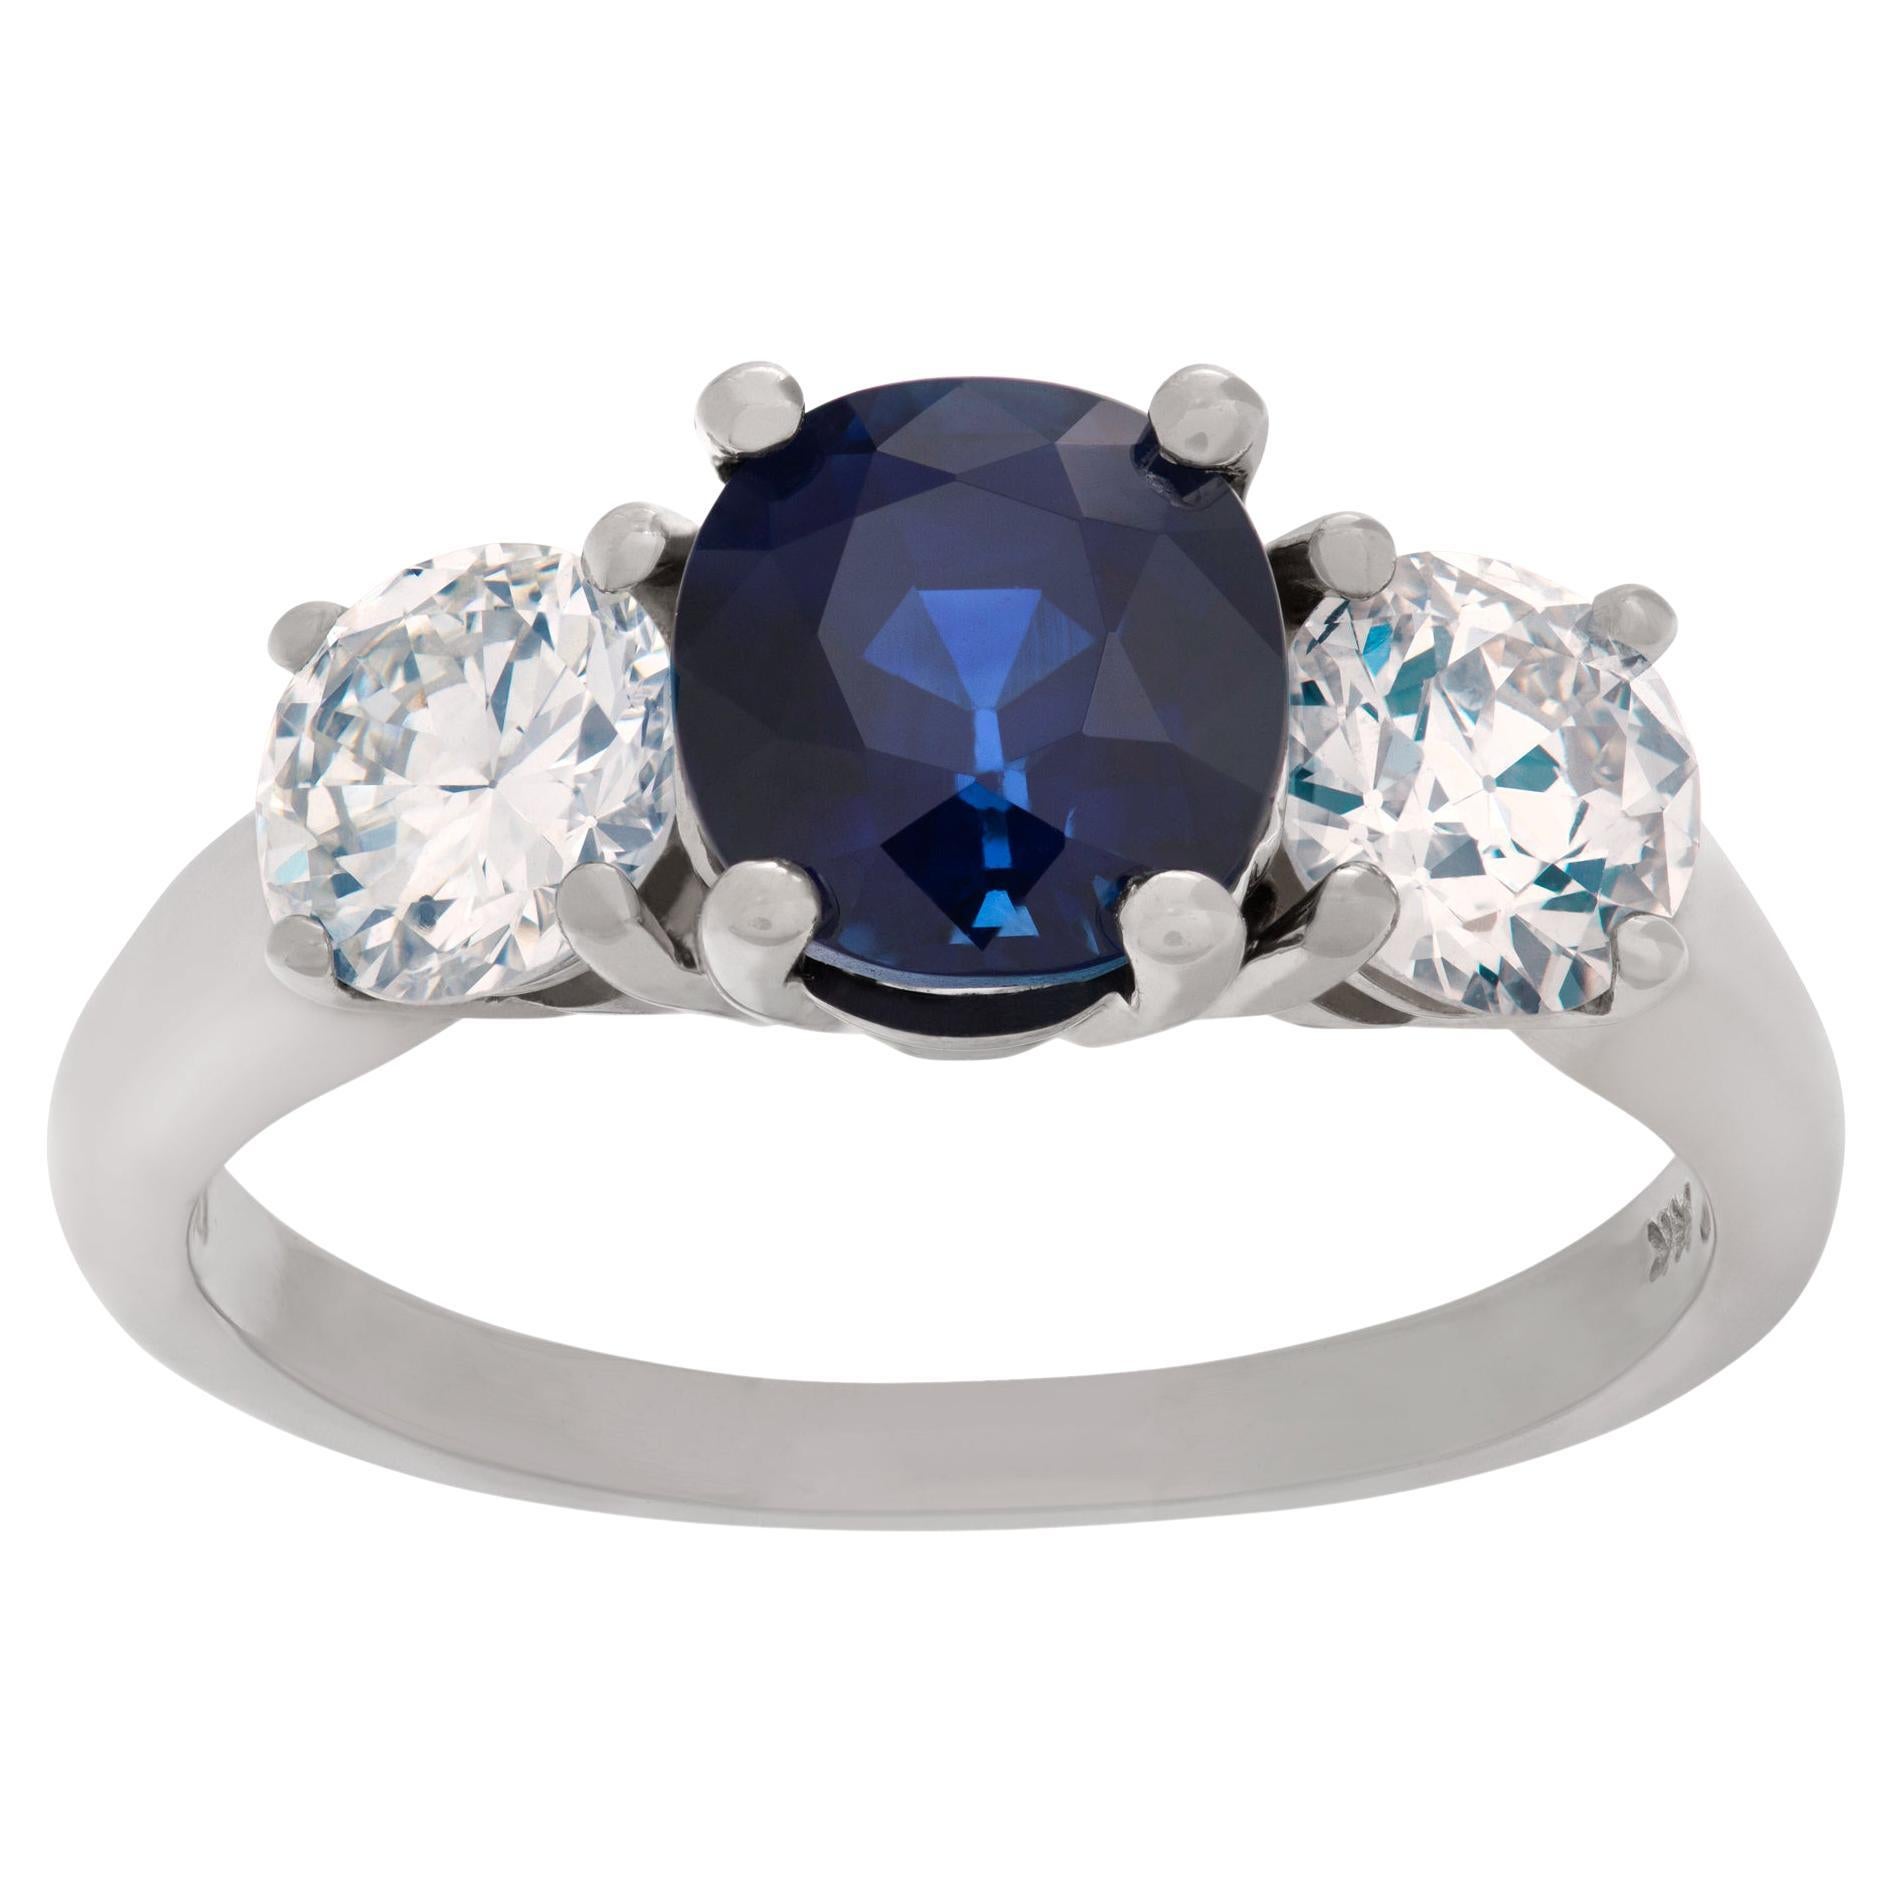 Sapphire & Diamond Ring in 14k White Gold, 1.92 Ct AGL Certified Unheated For Sale